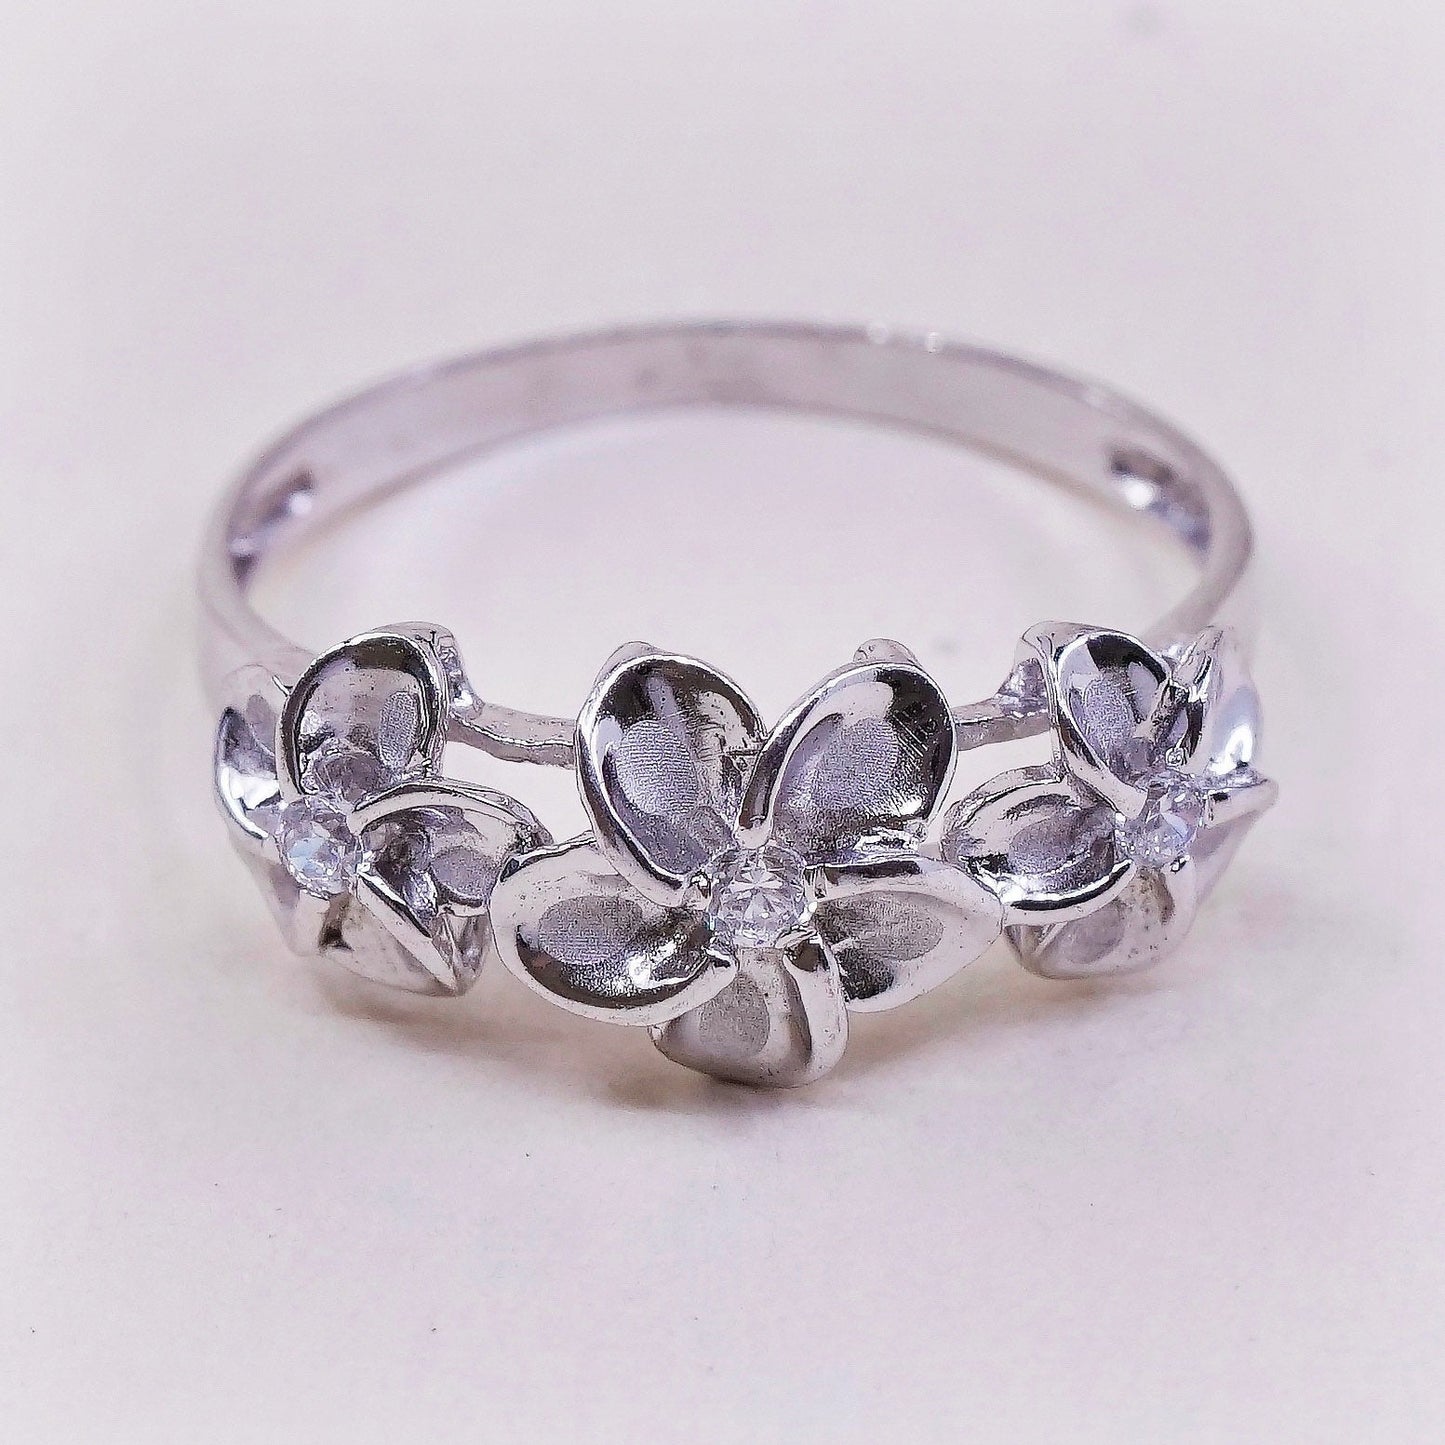 sz 9.25, vtg sterling silver daisy flower w/ crystal ring, stamped 925